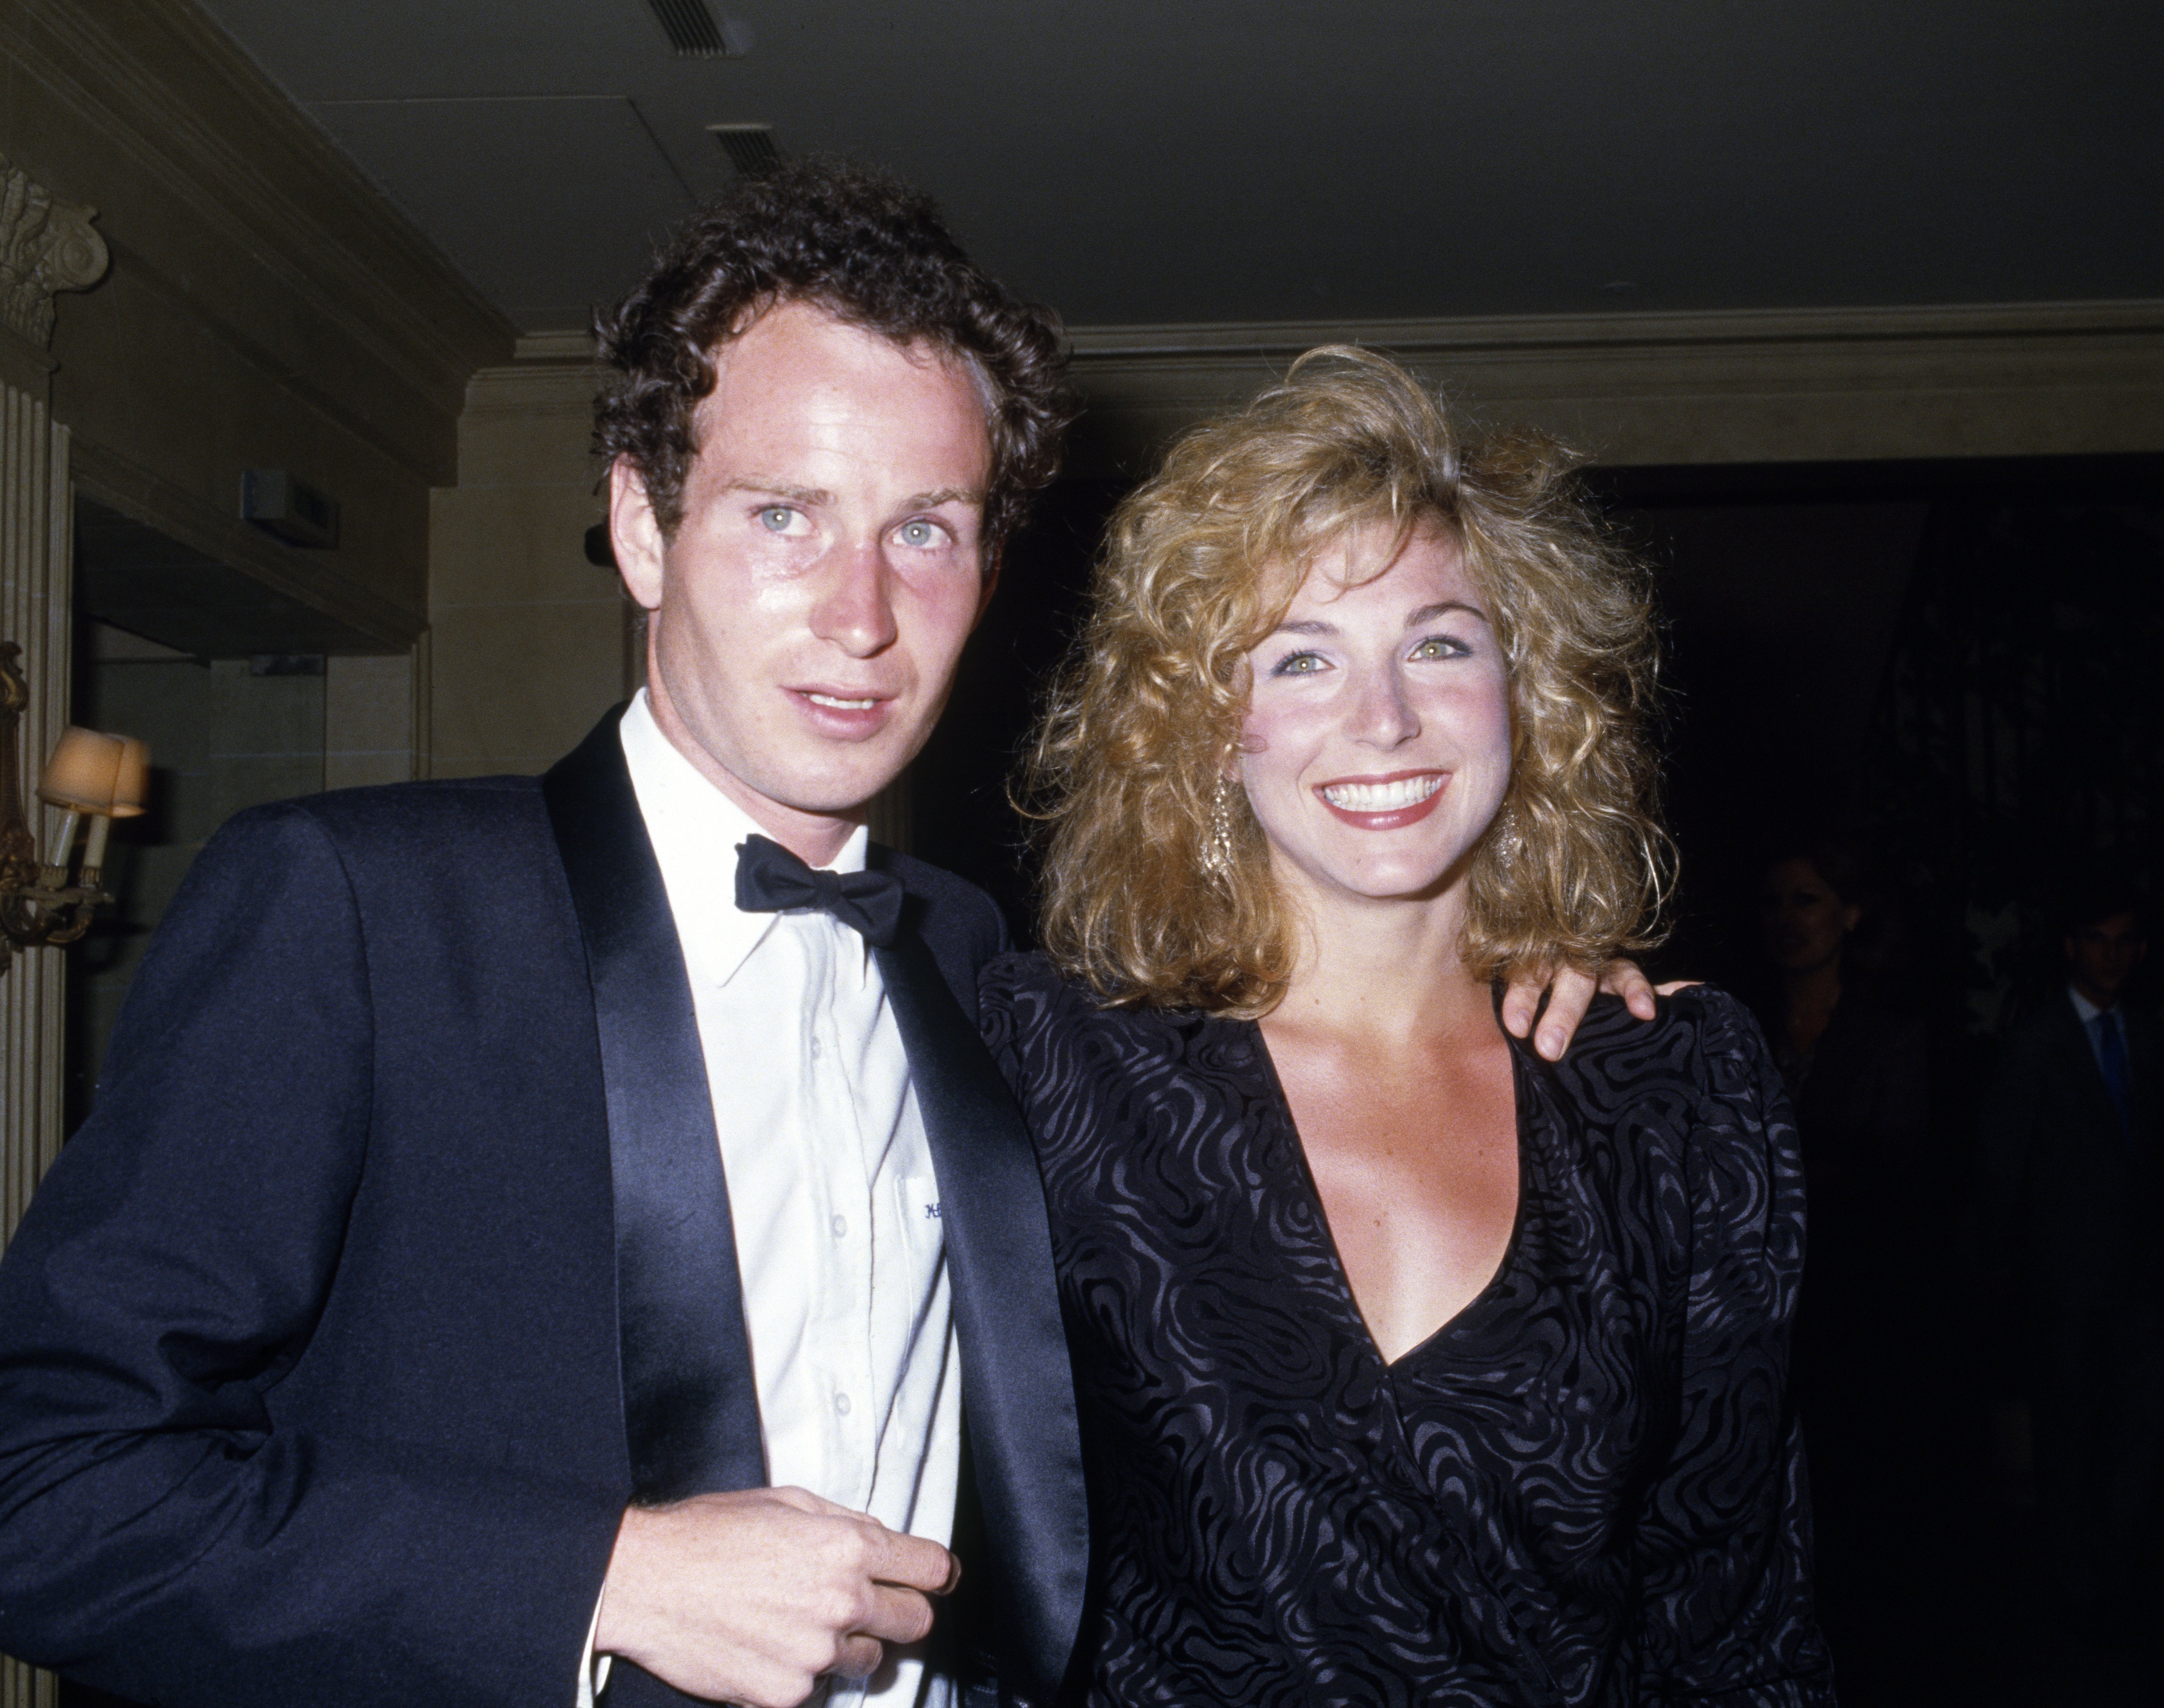 John McEnroe and Tatum O'Neal at the Players' Evening event during the French Open Tennis Championships on May 4, 1985 in Paris, France | Photo: GettyImages